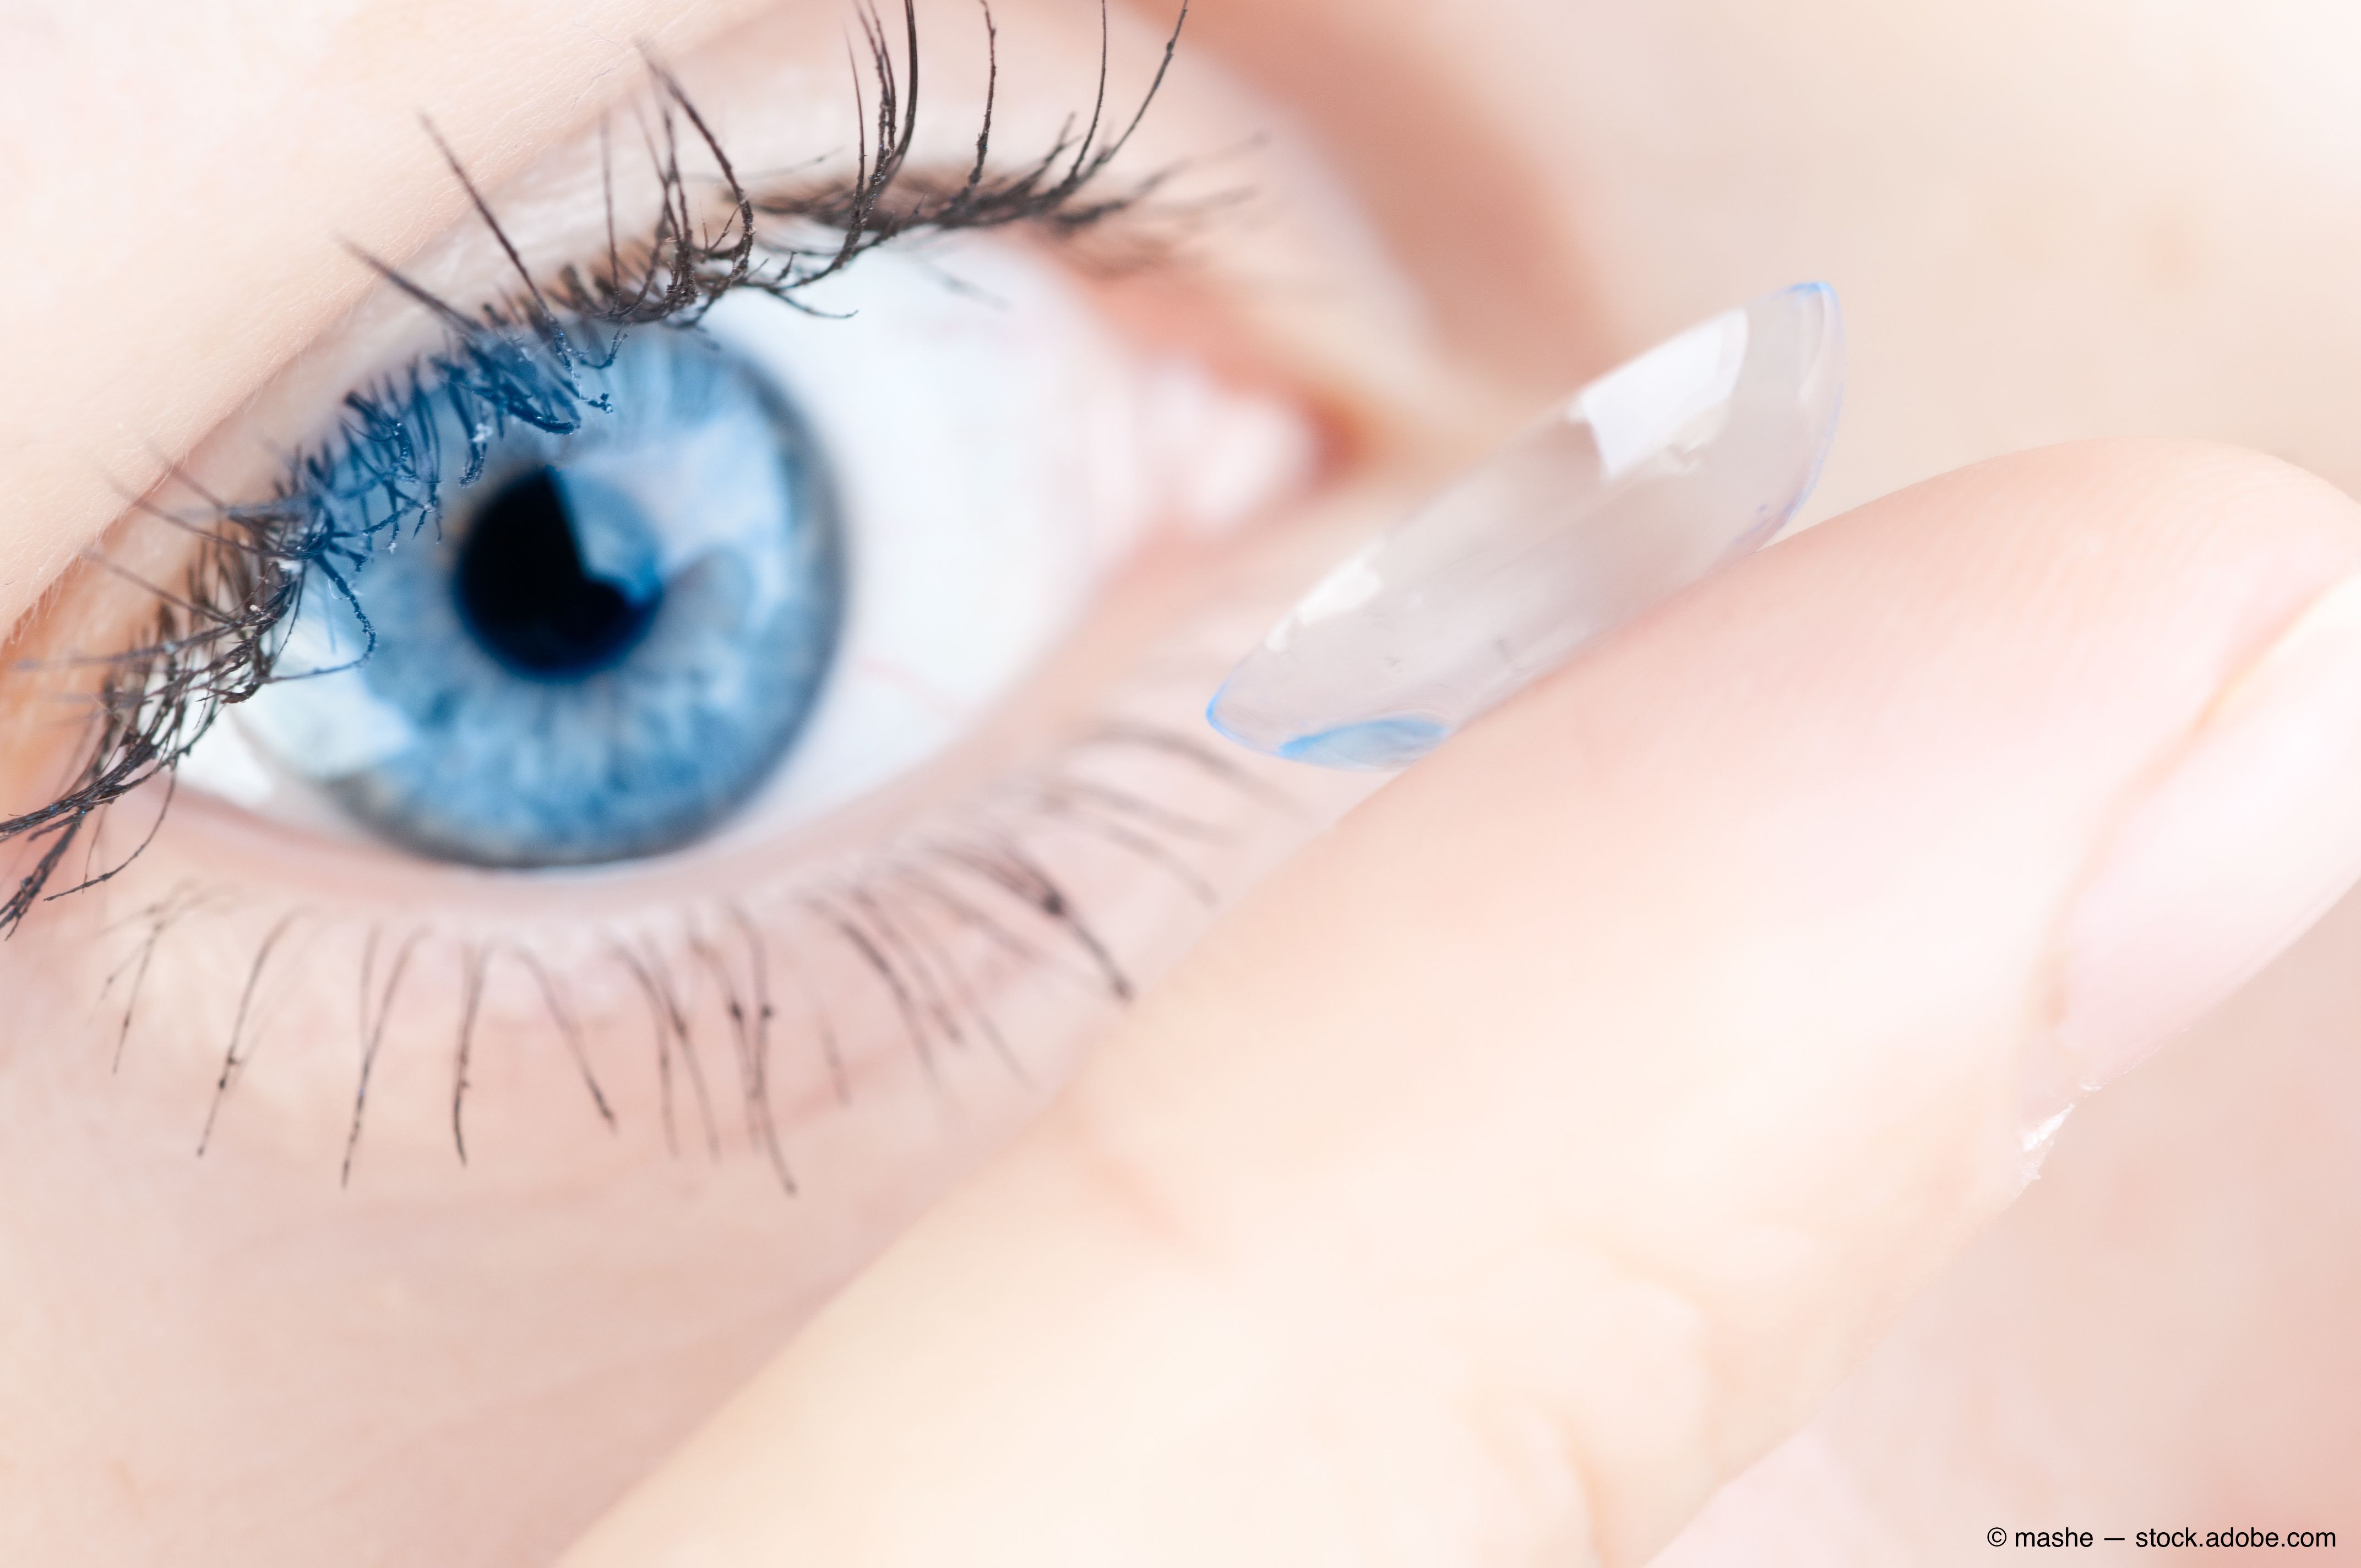 Research finds significant lack of contact lens knowledge in consumers